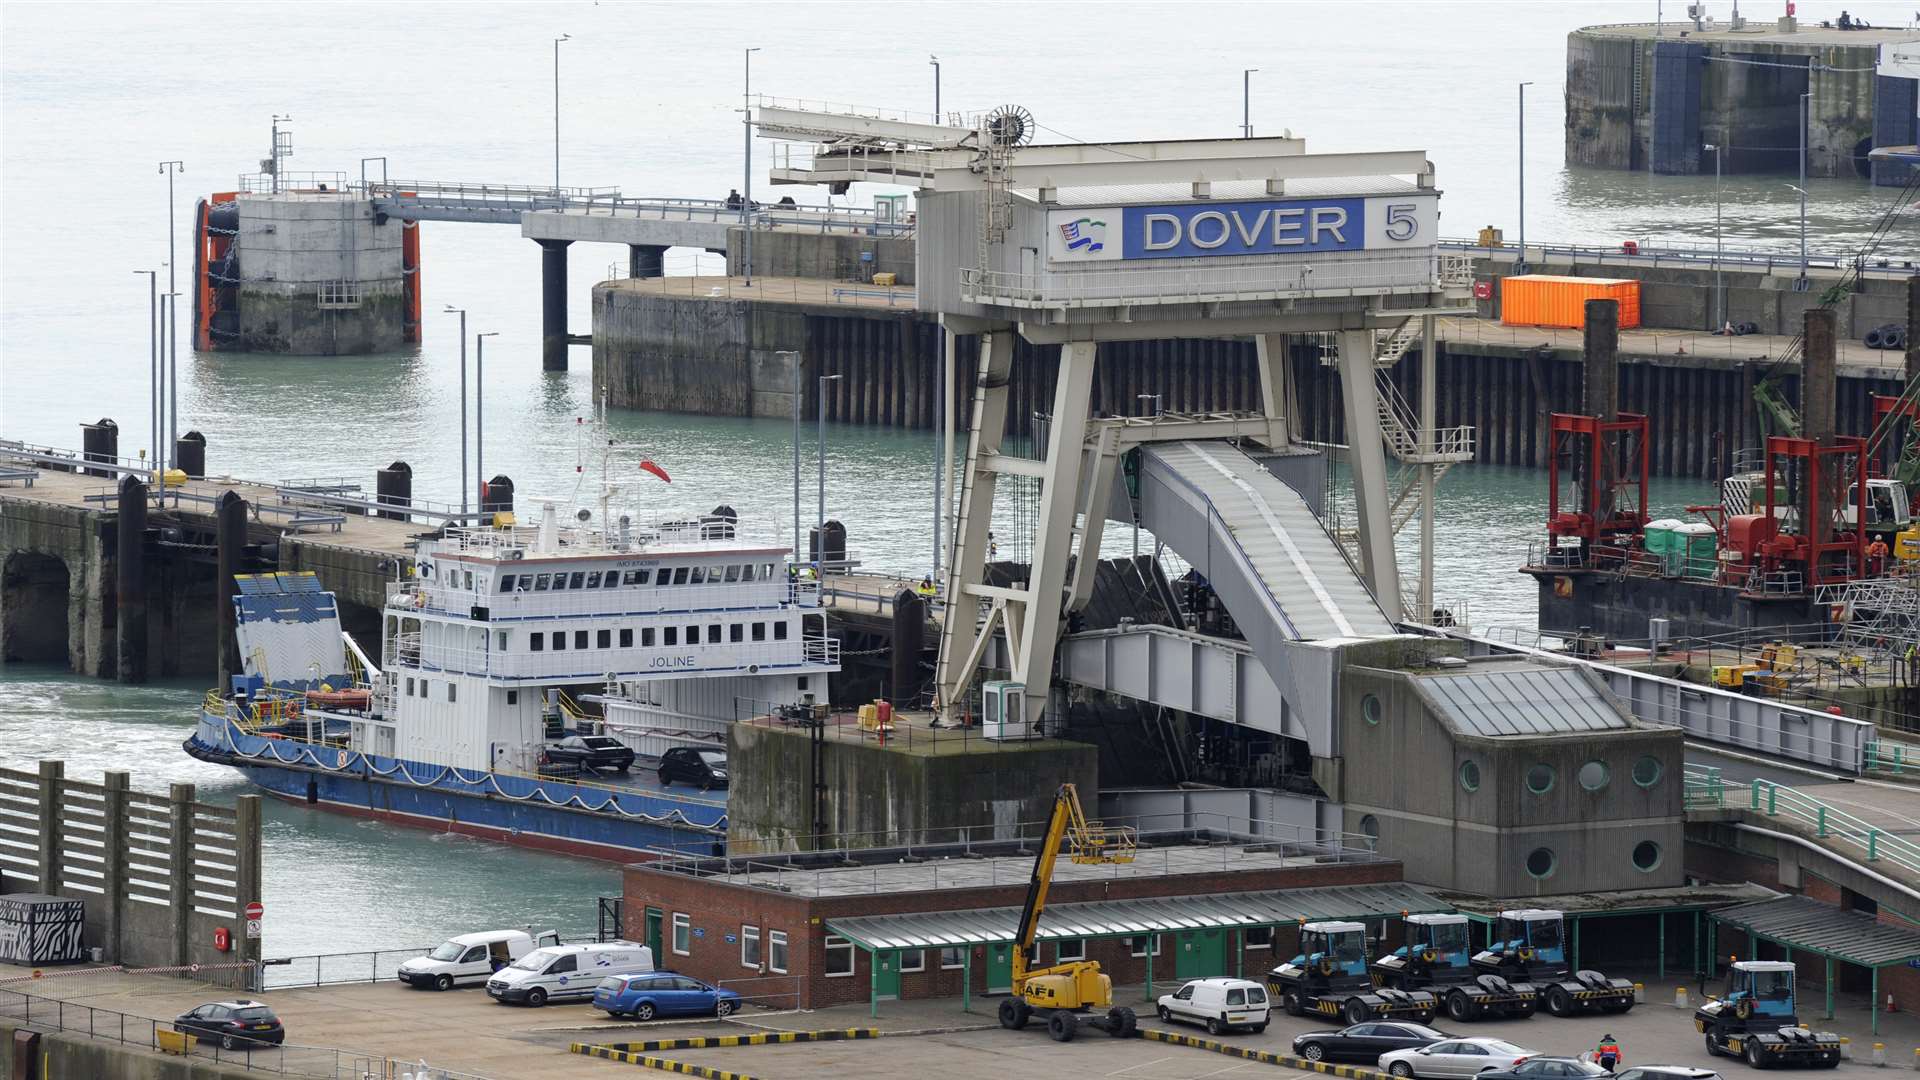 The Port of Dover handles more than £100 billion of international trade annually